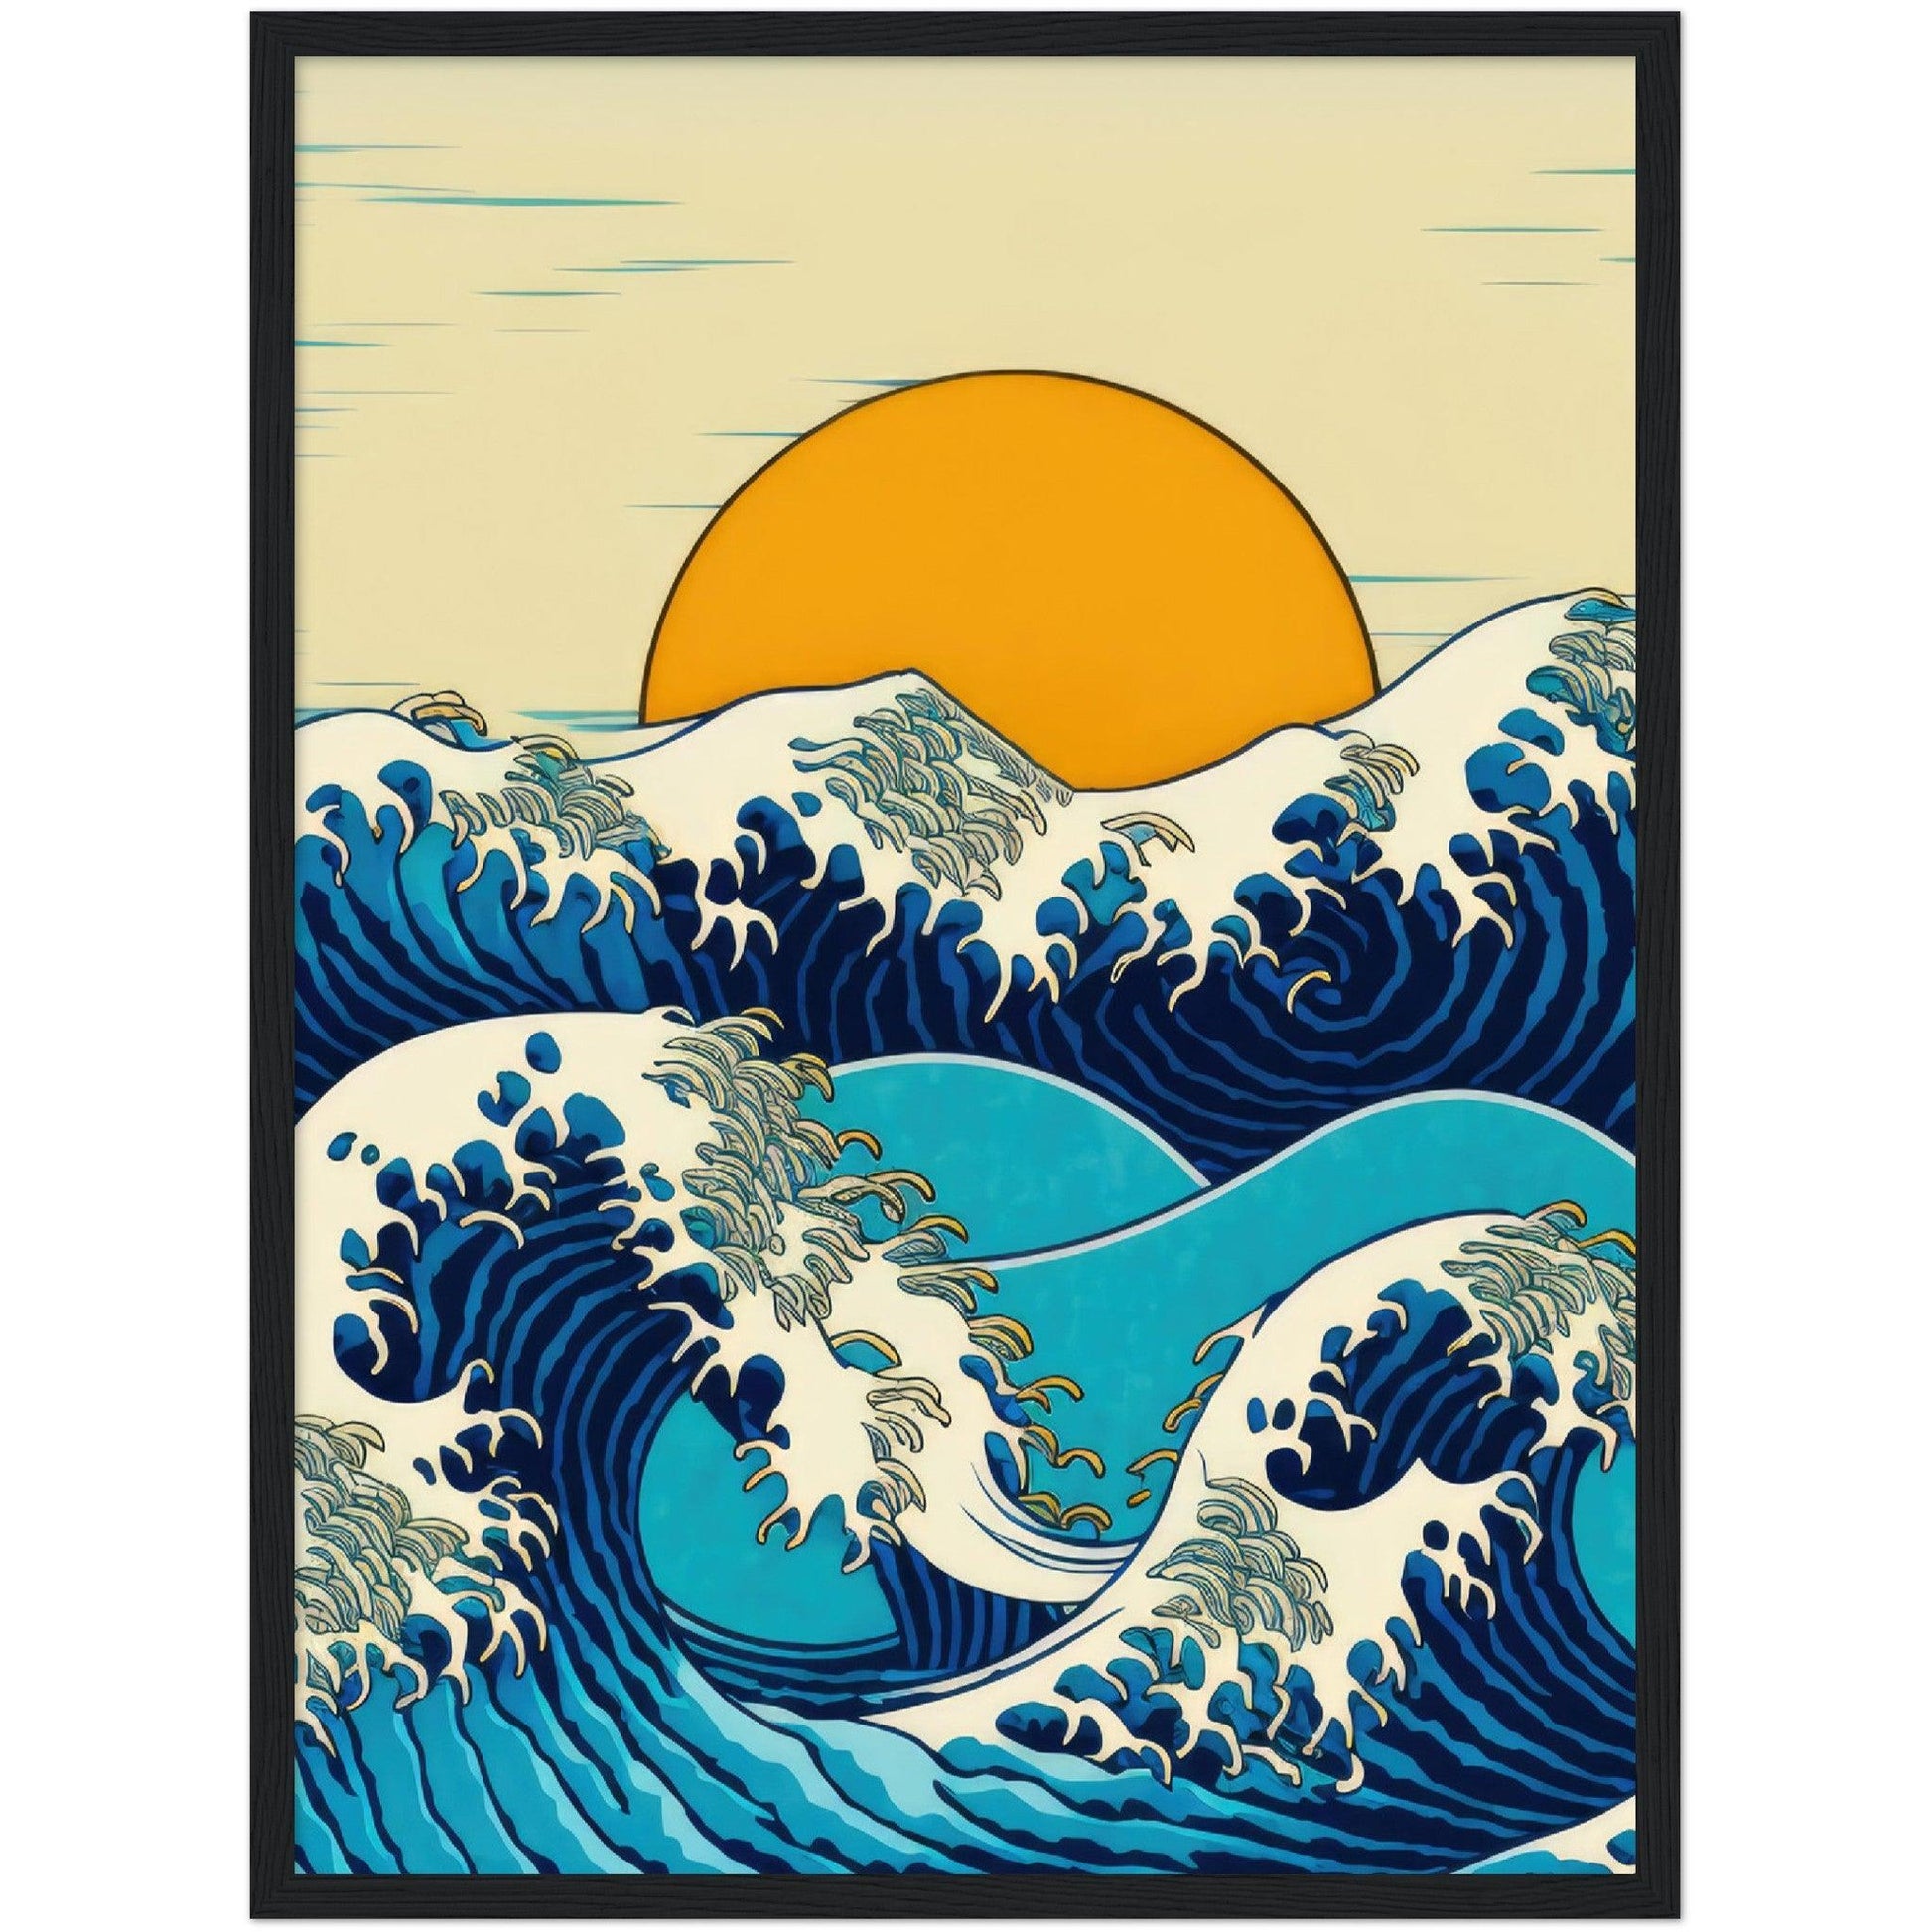 Sunset over waves - Masters in Art